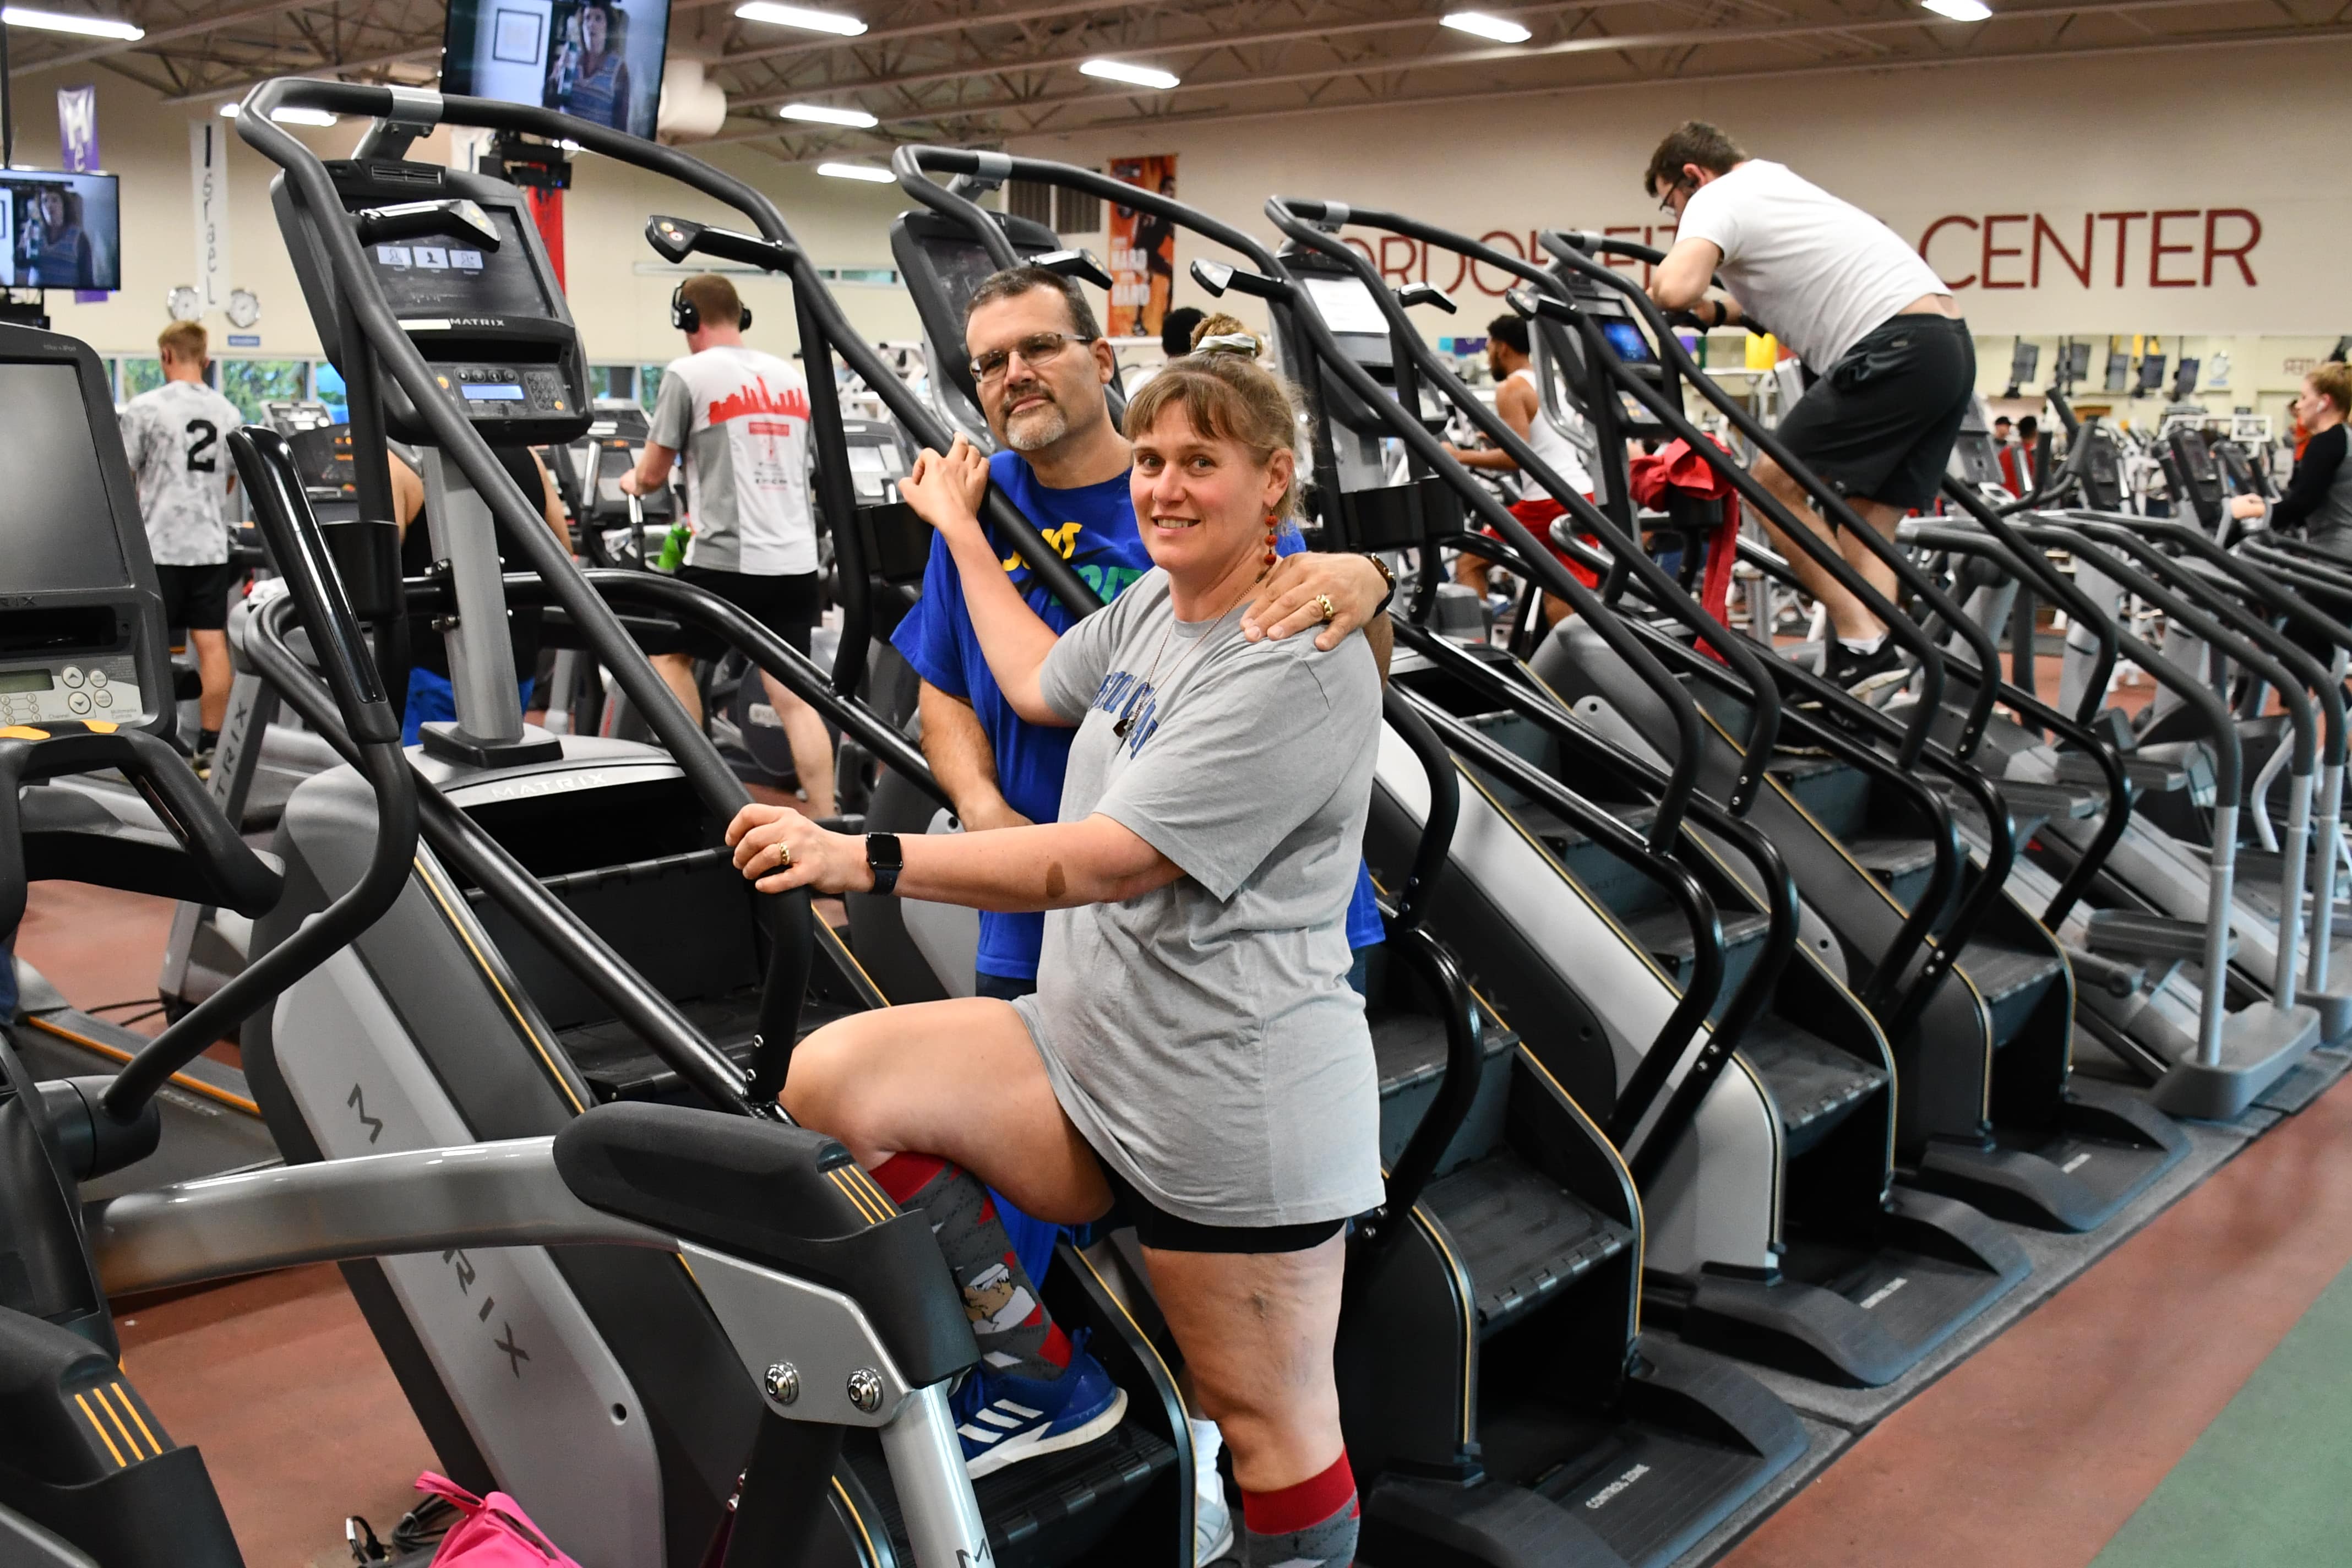 Andy and Laura Gzibovskis standing on a Stairmaster, with other JCC members working out in the background